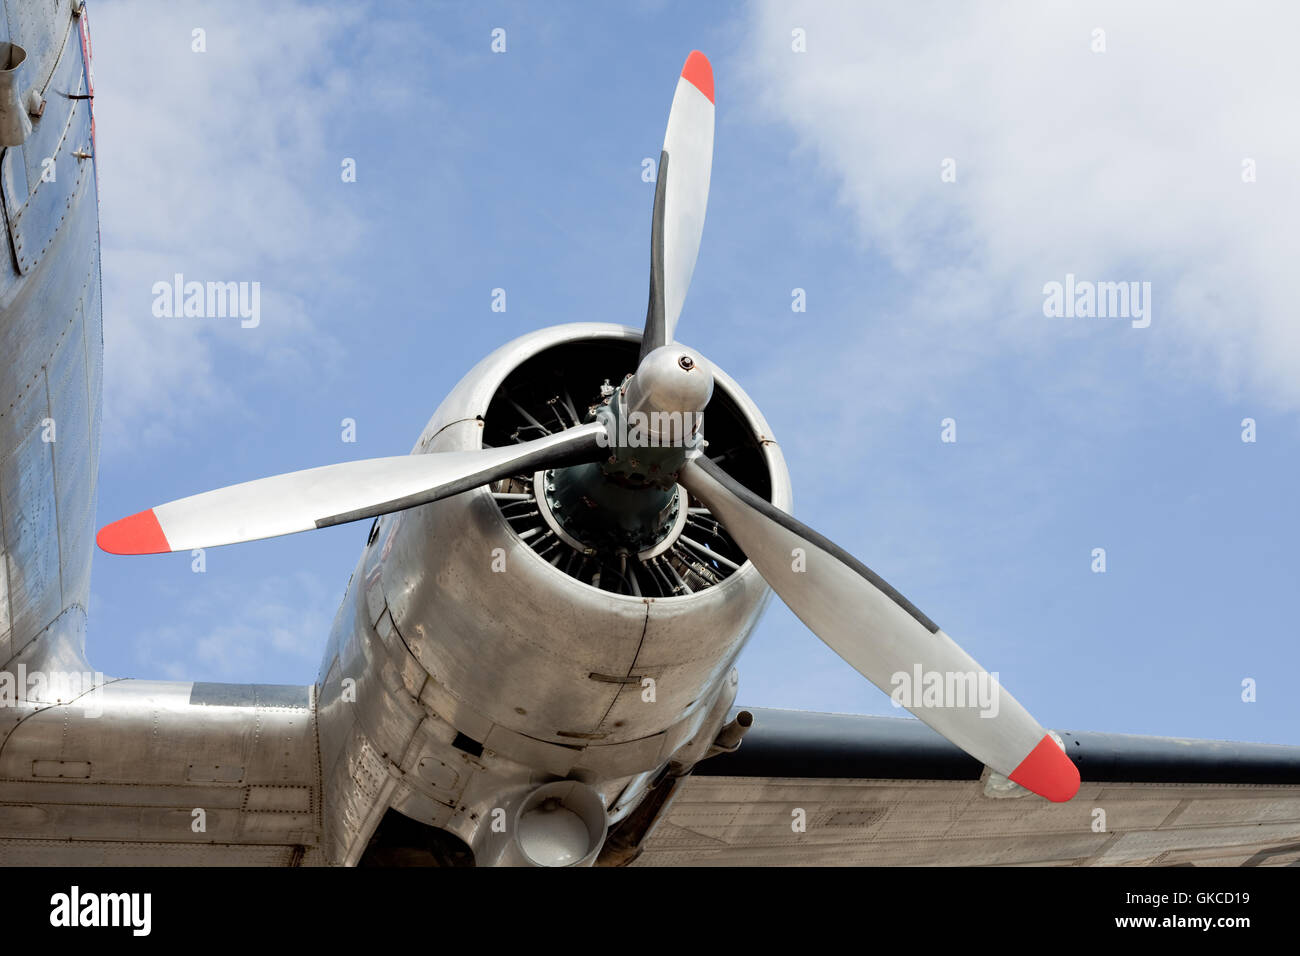 Propeller engine of vintage airplane DC-3 Stock Photo